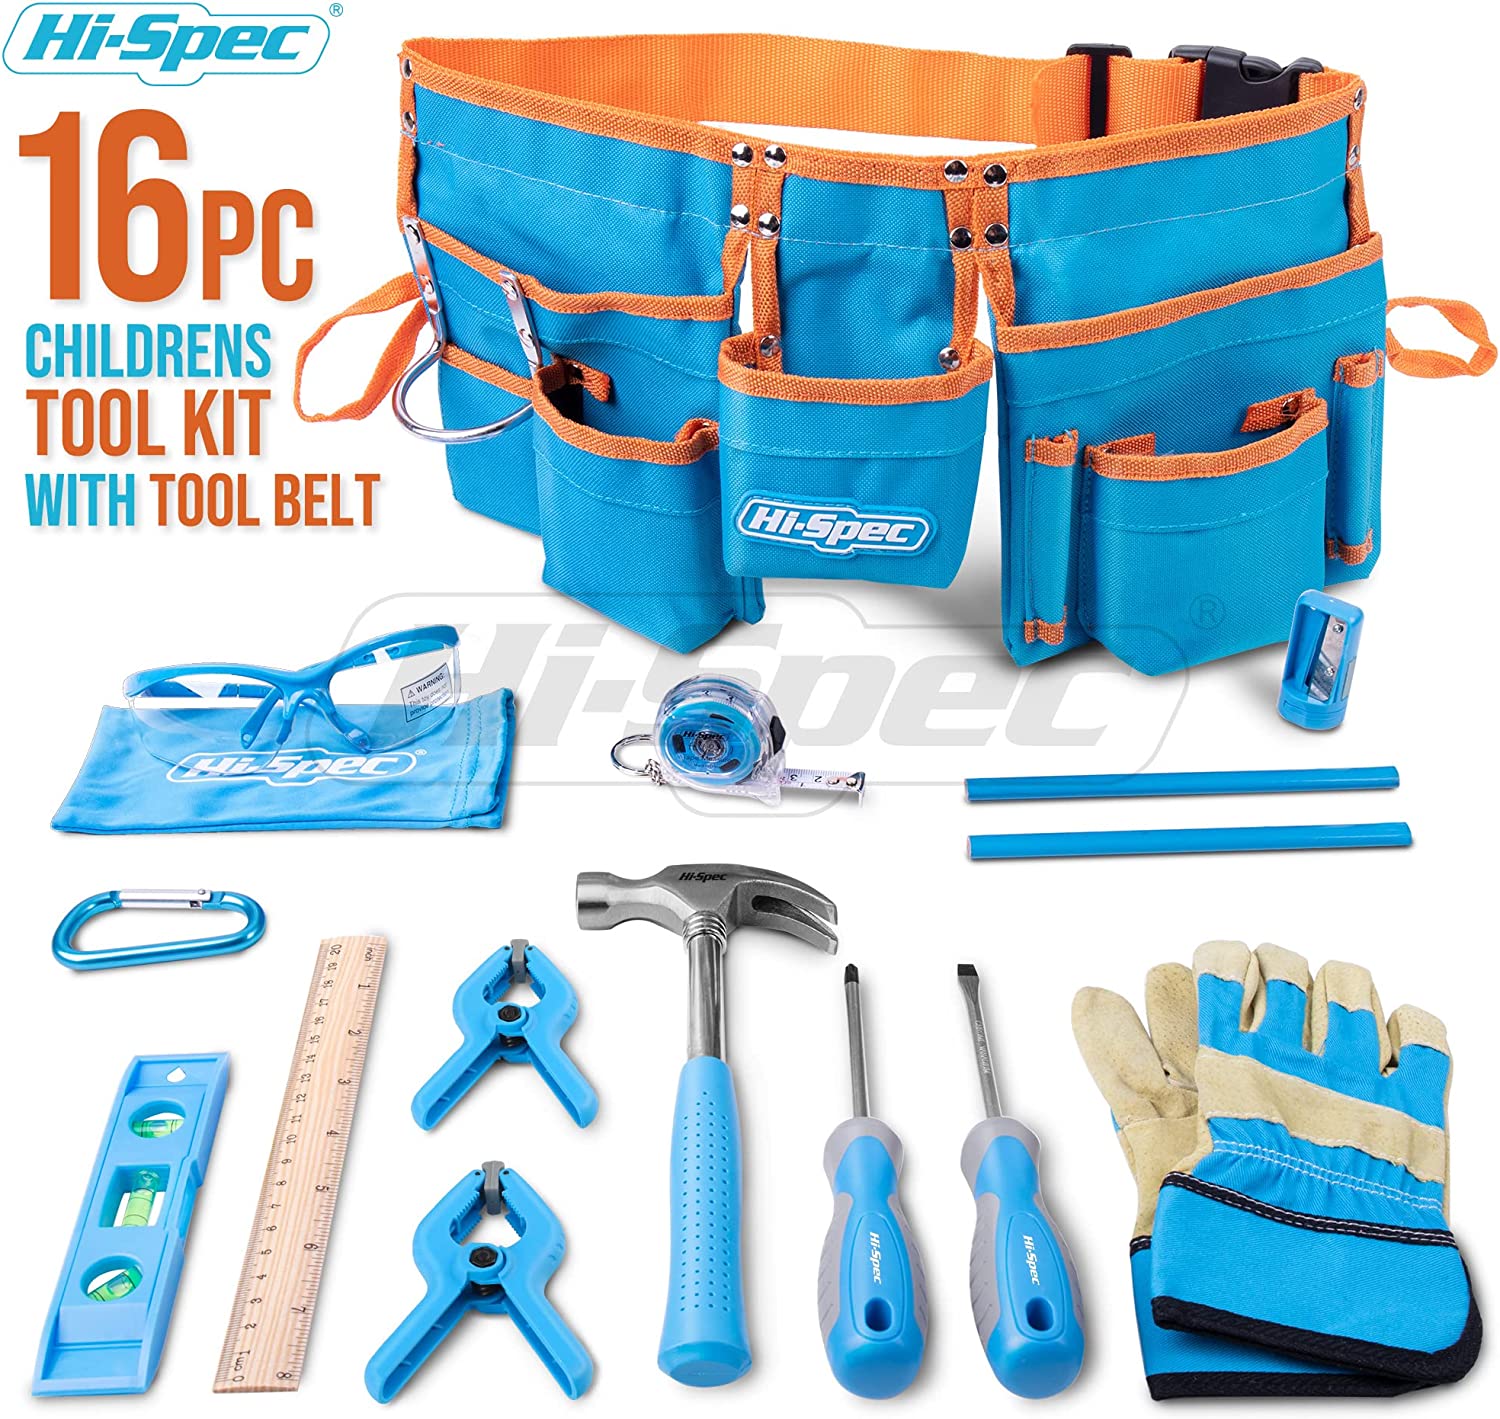 REXBETI 18pcs Blue Young Builder's Tool Set with Real Hand Tools,  Reinforced Kids Tool Belt, Waist 20-32, Kids Learning Tool Kit for Home  DIY and